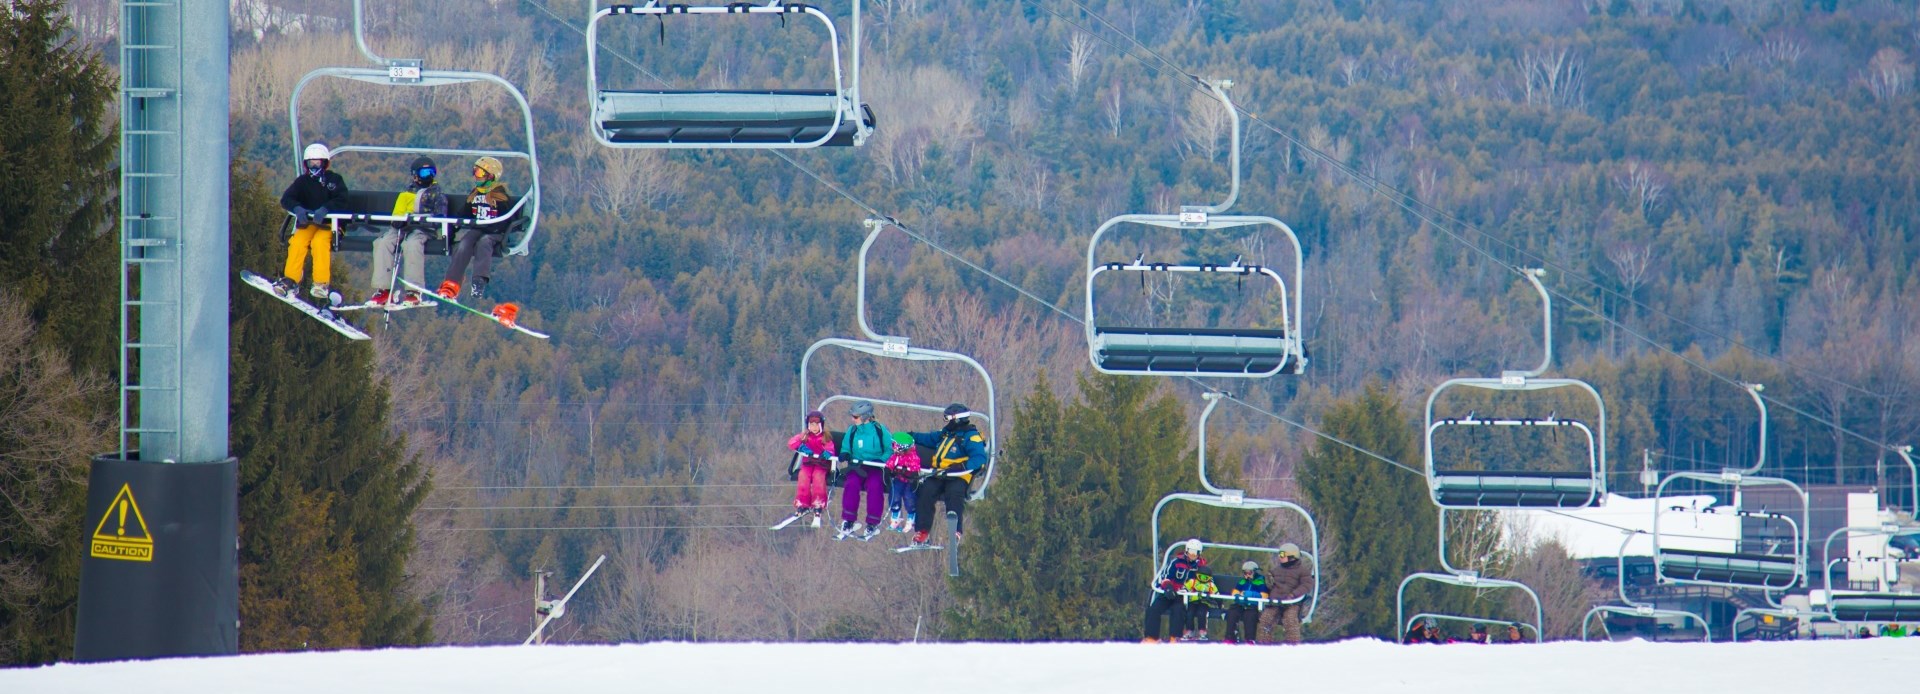 Brimacombe Chair Lift